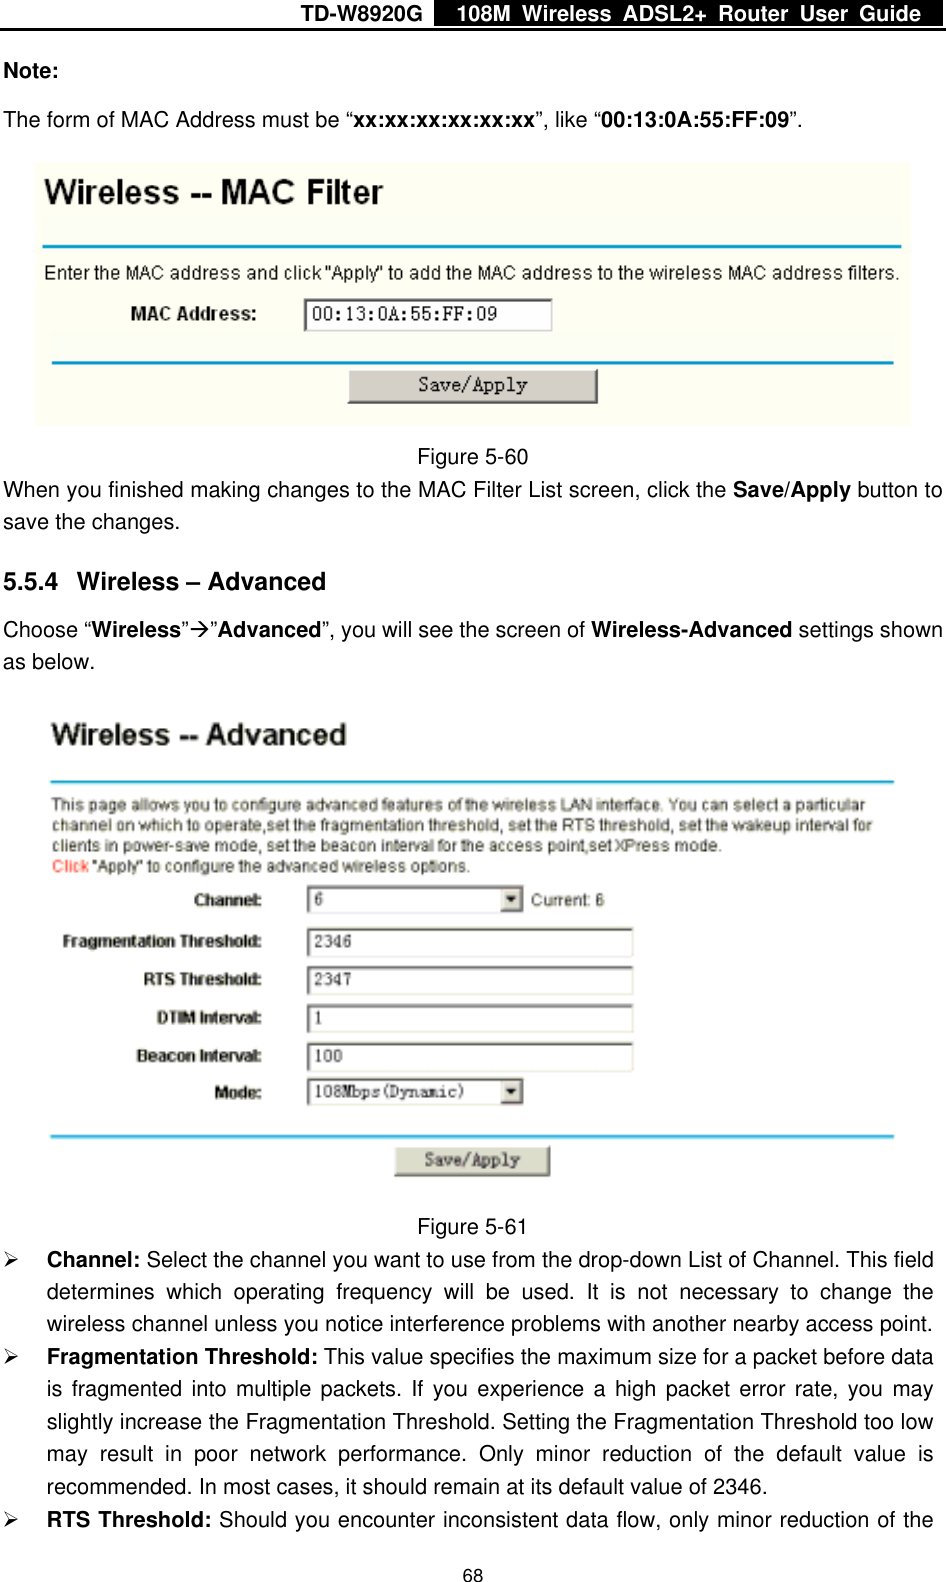 TD-W8920G    108M Wireless ADSL2+ Router User Guide    68Note: The form of MAC Address must be “xx:xx:xx:xx:xx:xx”, like “00:13:0A:55:FF:09”.  Figure 5-60 When you finished making changes to the MAC Filter List screen, click the Save/Apply button to save the changes. 5.5.4  Wireless – Advanced Choose “Wireless”Æ”Advanced”, you will see the screen of Wireless-Advanced settings shown as below.  Figure 5-61 ¾ Channel: Select the channel you want to use from the drop-down List of Channel. This field determines which operating frequency will be used. It is not necessary to change the wireless channel unless you notice interference problems with another nearby access point. ¾ Fragmentation Threshold: This value specifies the maximum size for a packet before data is fragmented into multiple packets. If you experience a high packet error rate, you may slightly increase the Fragmentation Threshold. Setting the Fragmentation Threshold too low may result in poor network performance. Only minor reduction of the default value is recommended. In most cases, it should remain at its default value of 2346. ¾ RTS Threshold: Should you encounter inconsistent data flow, only minor reduction of the 